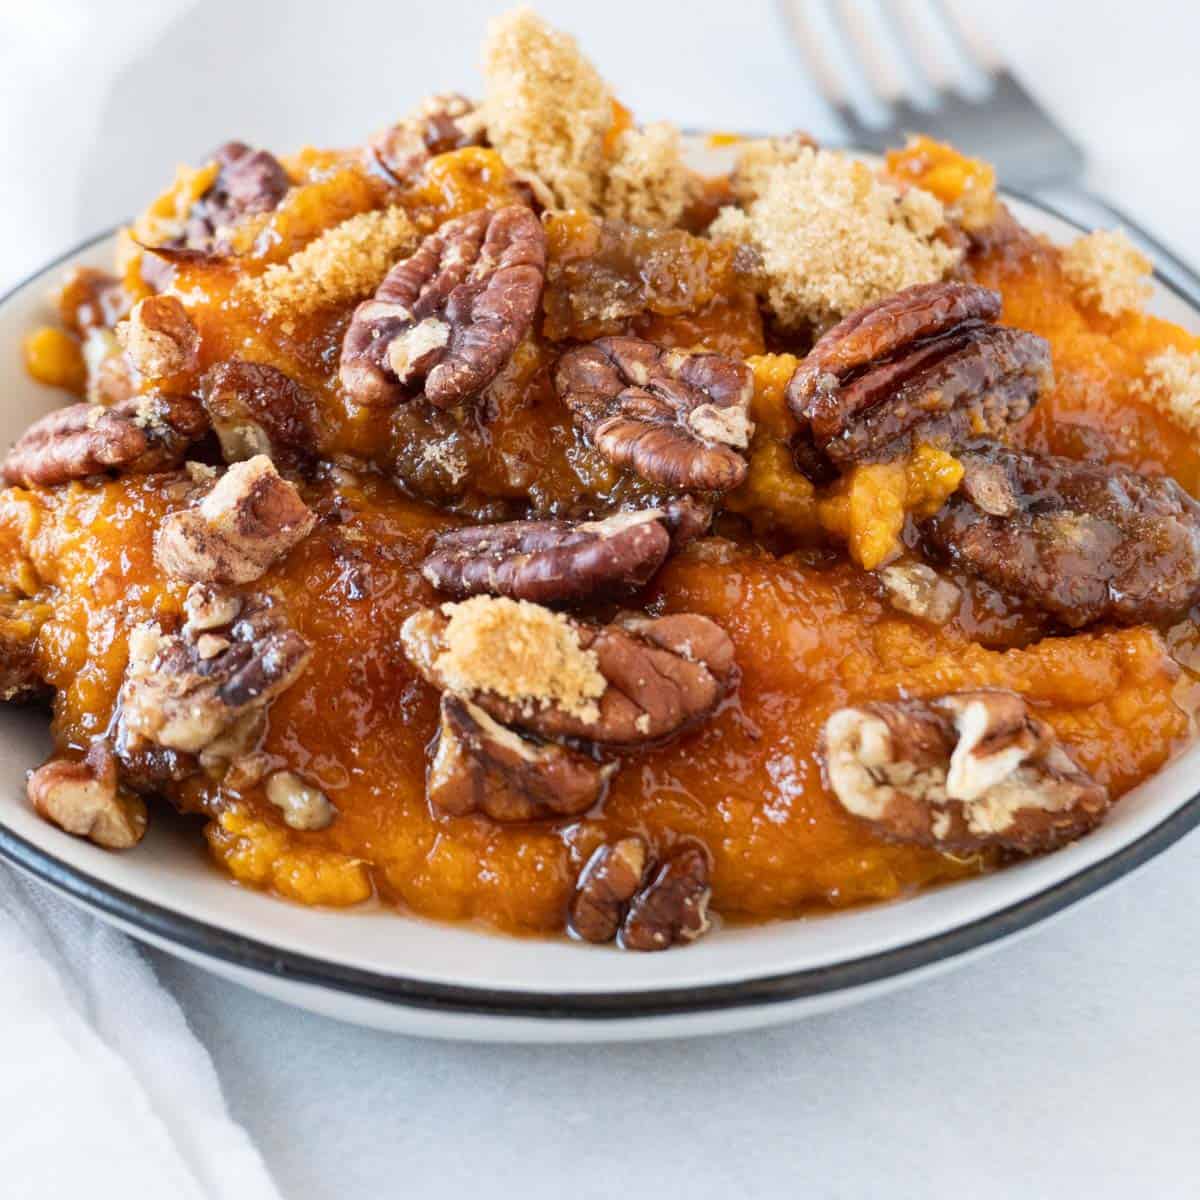 sweet potato pudding on plate featured image